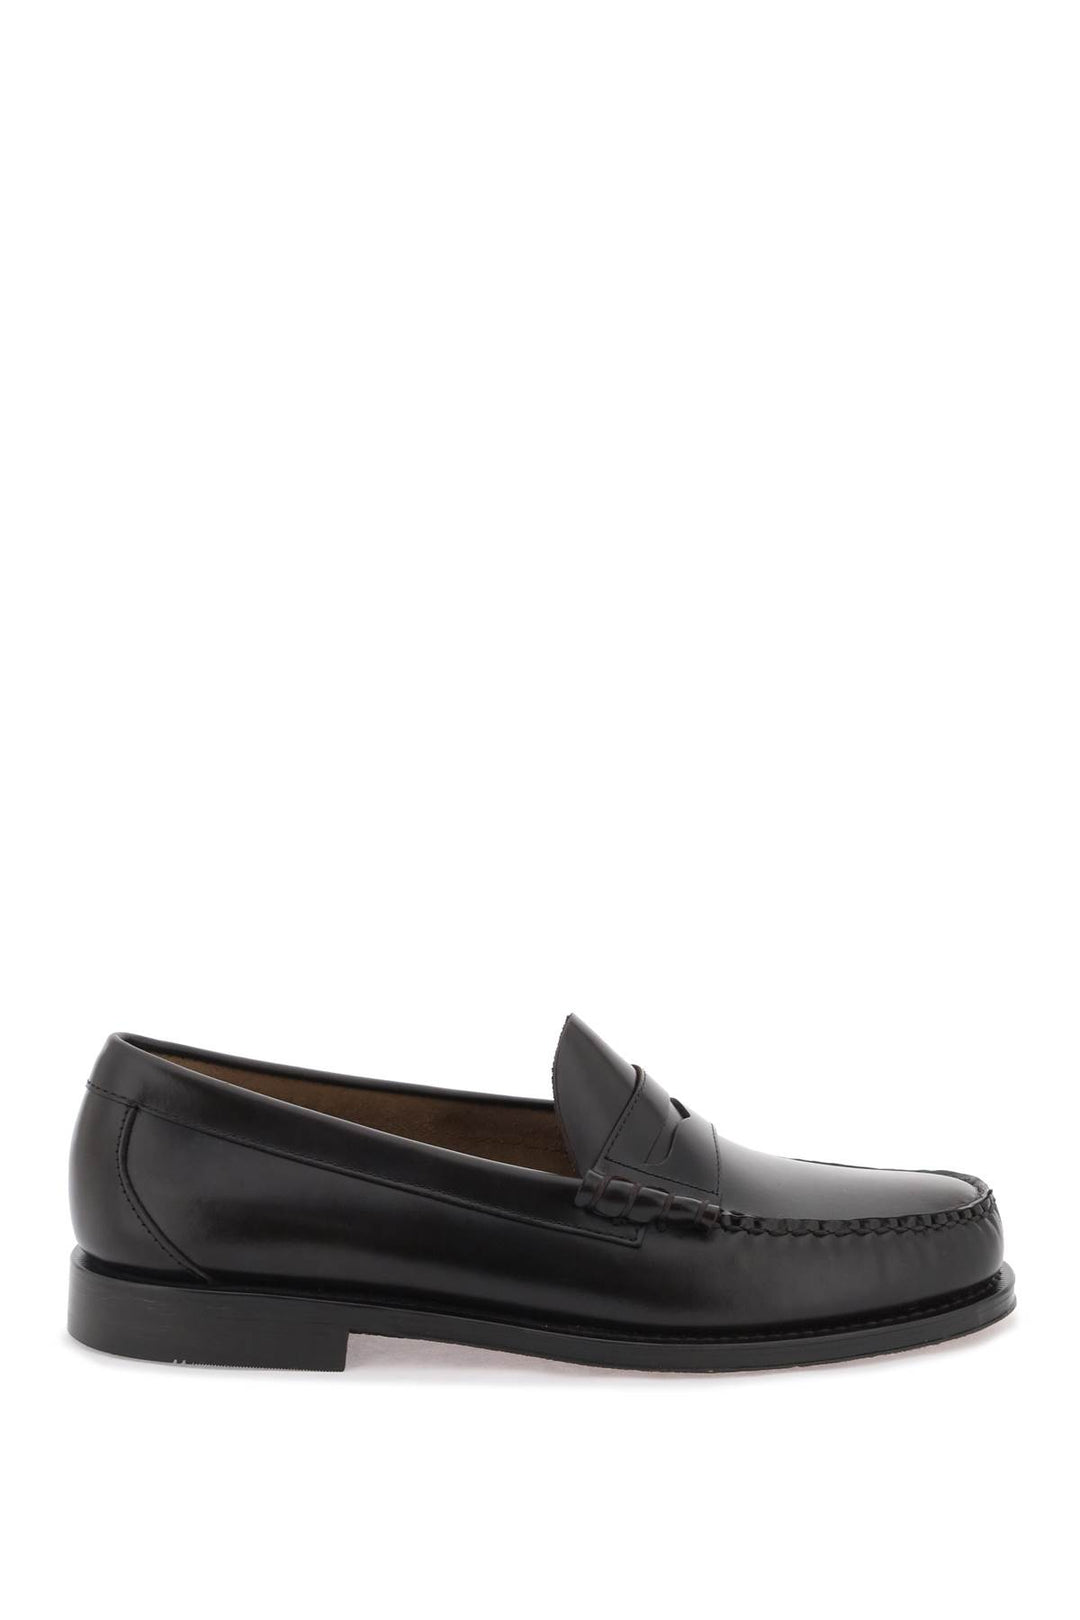 G.H. Bass Weejuns Larson Penny Loafers   Marrone